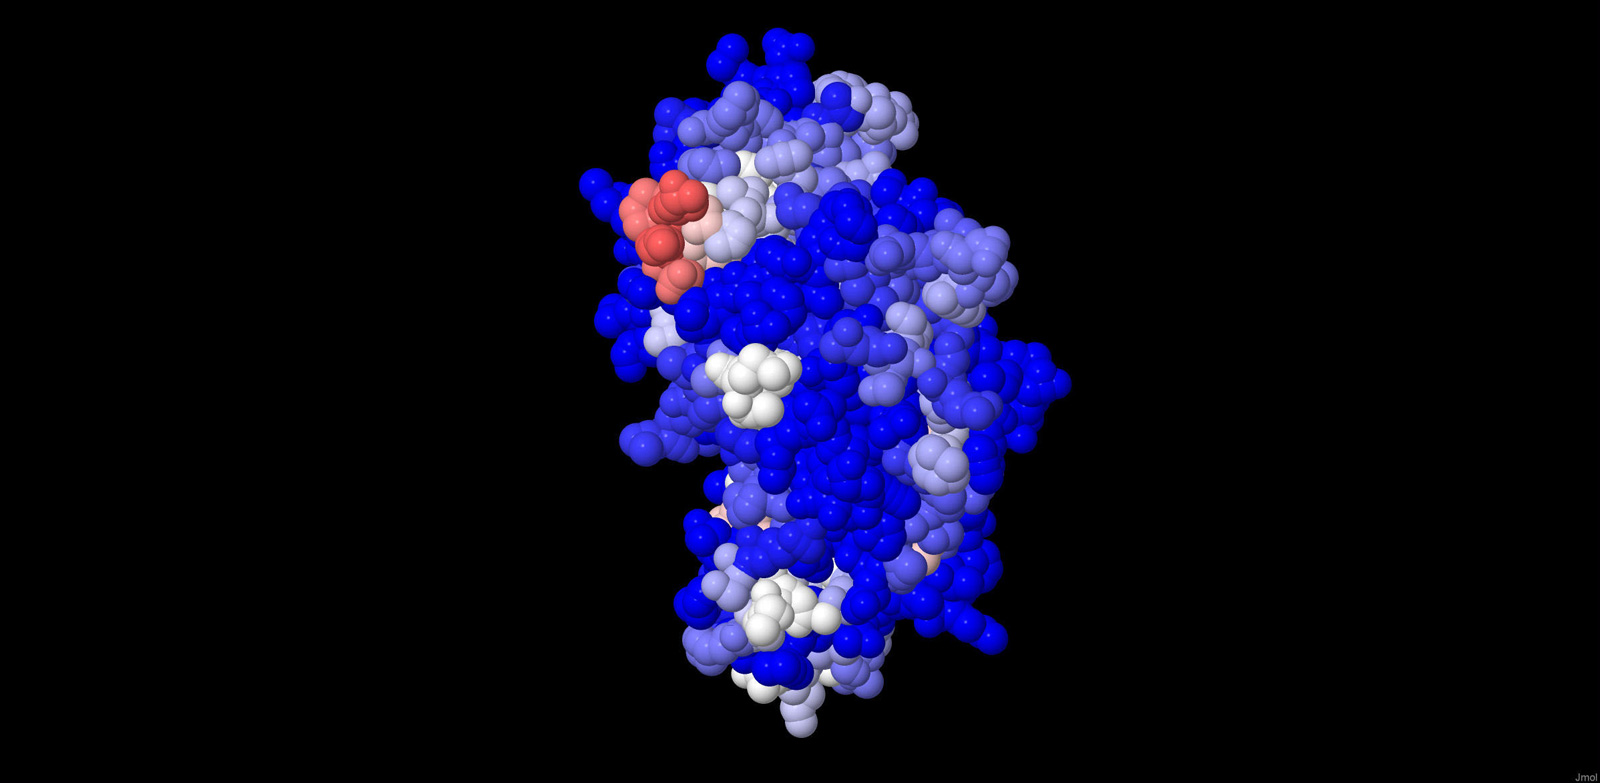 3-D space-filling model of a soy antigen. The areas identified most frequently by the antibodies of patient sera are shown in white or even red, unidentified areas are colored in blue. 